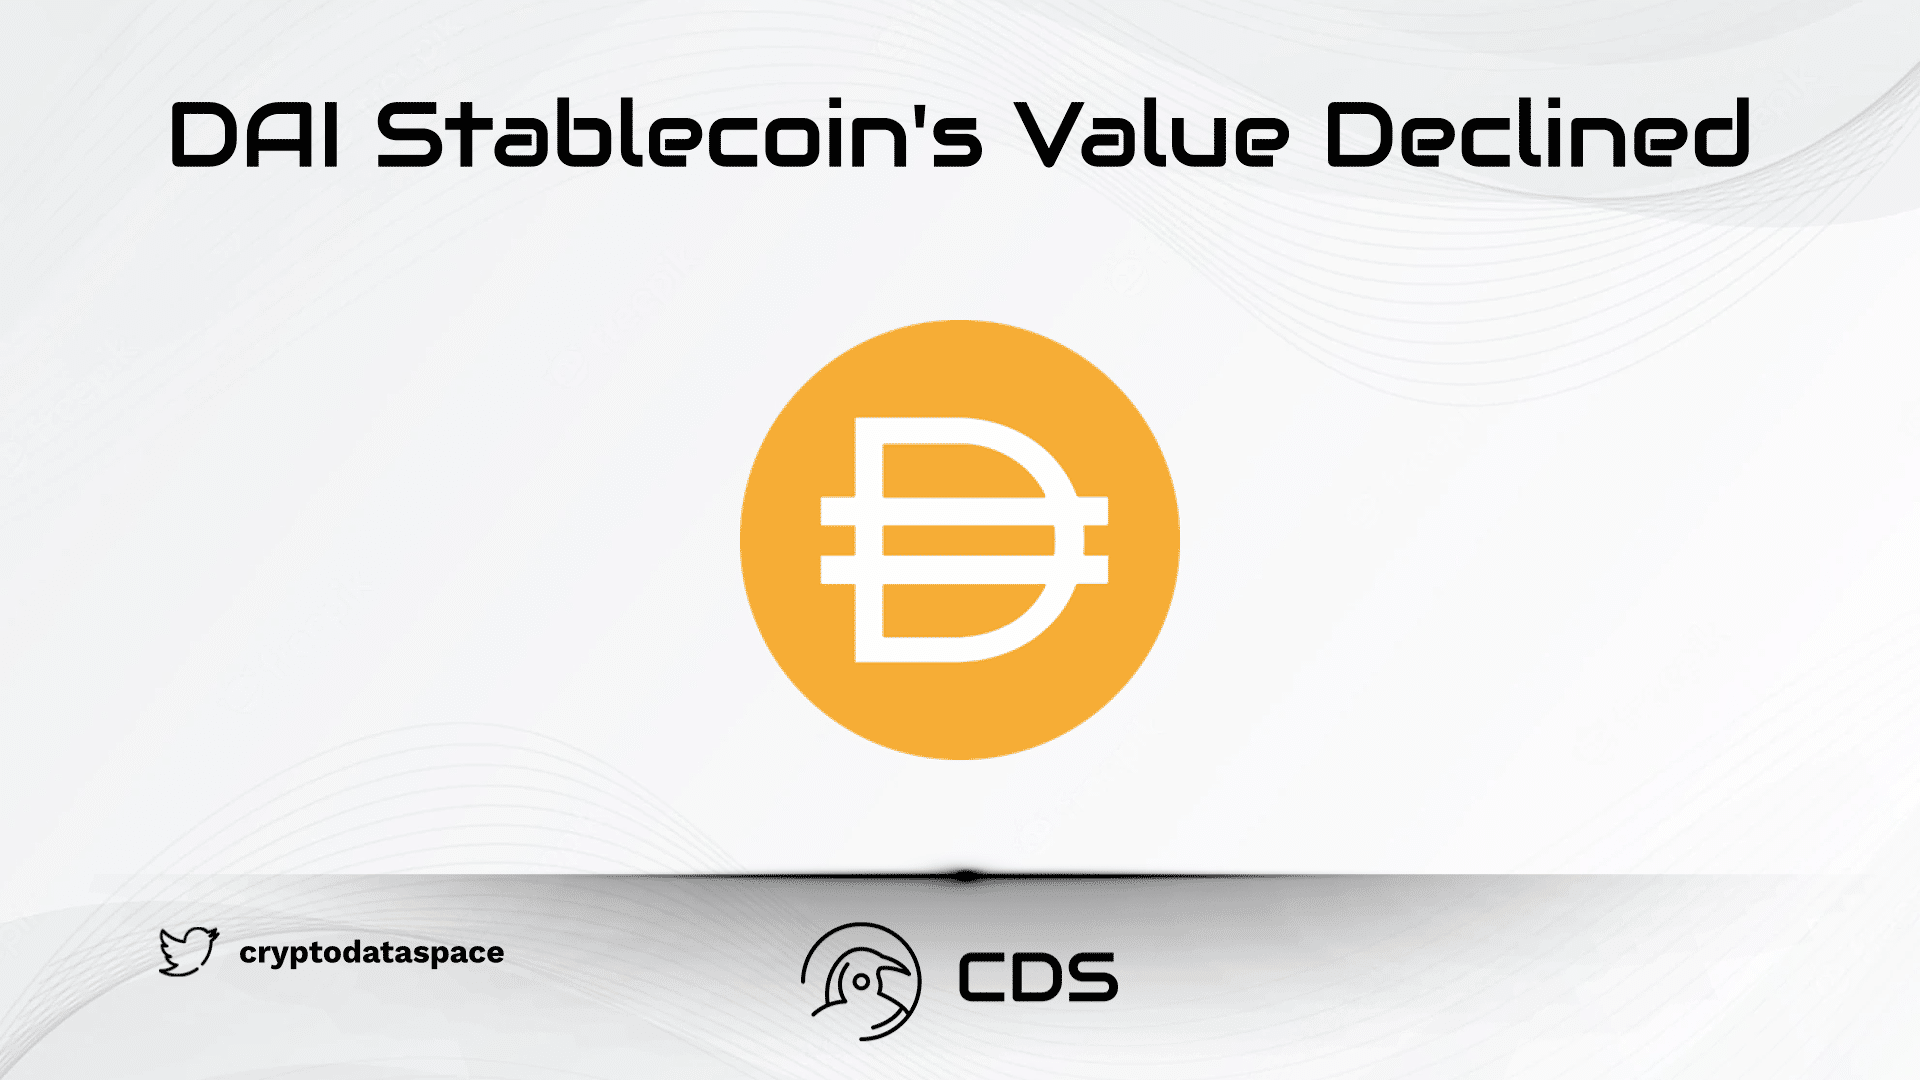 DAI Stablecoin's Value Declined